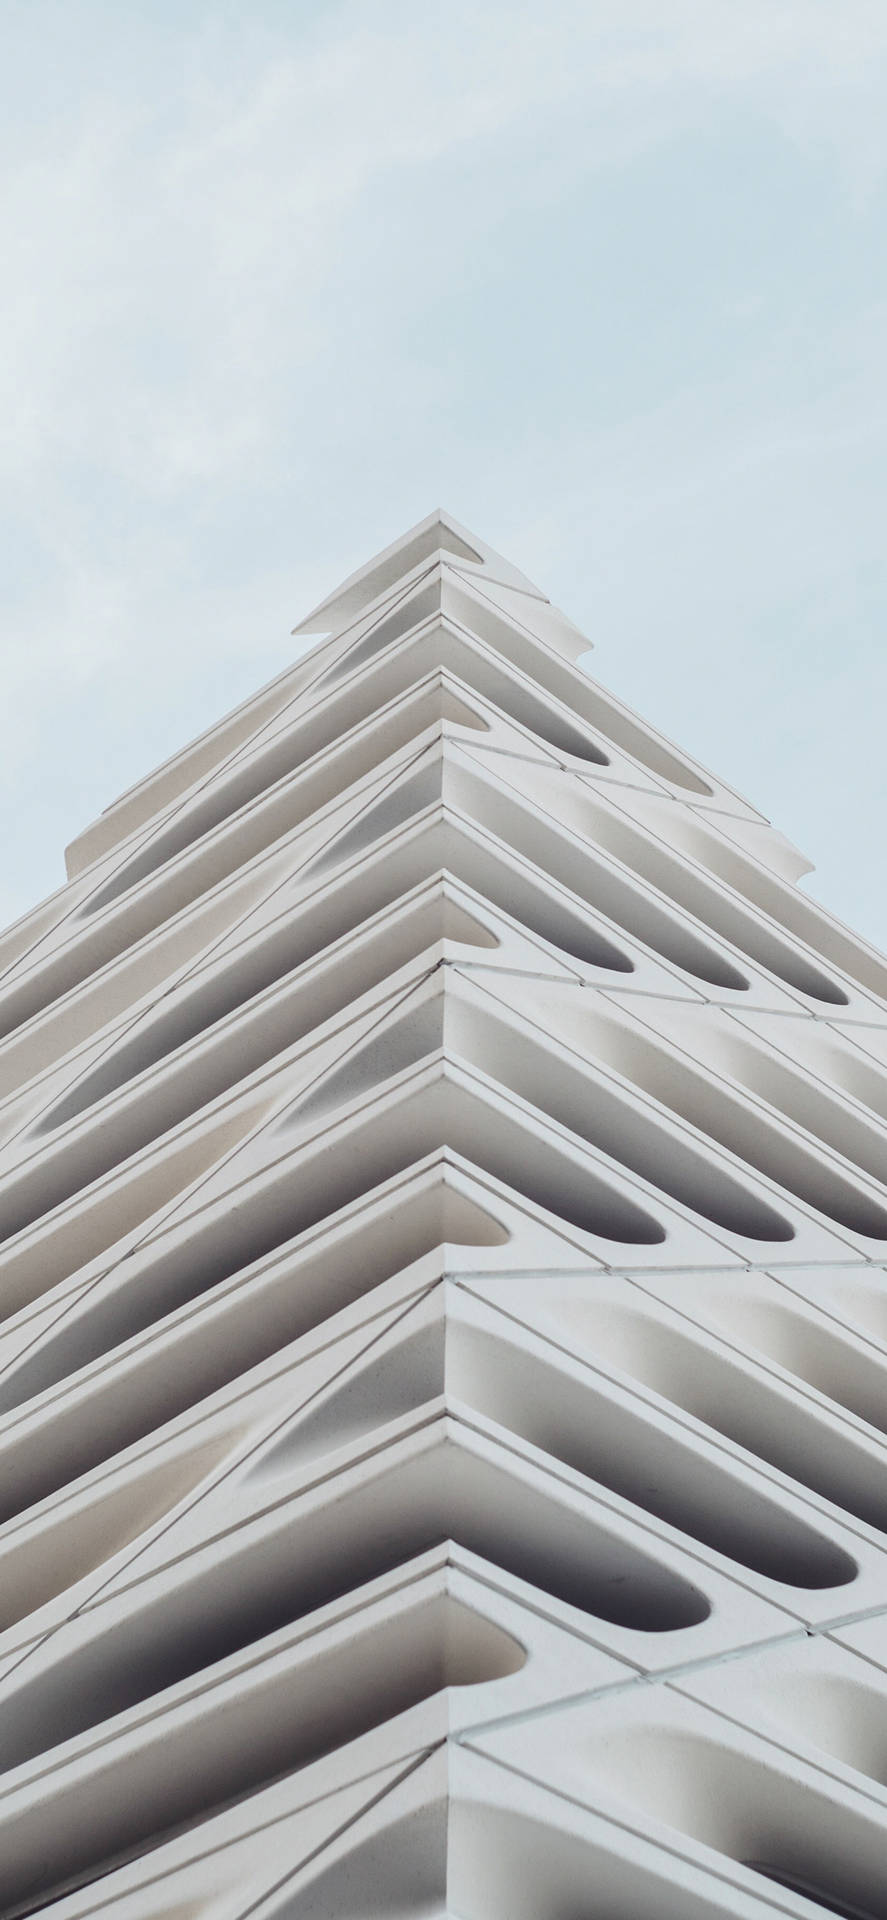 Cool Iphone Xs Max White Architecture Background